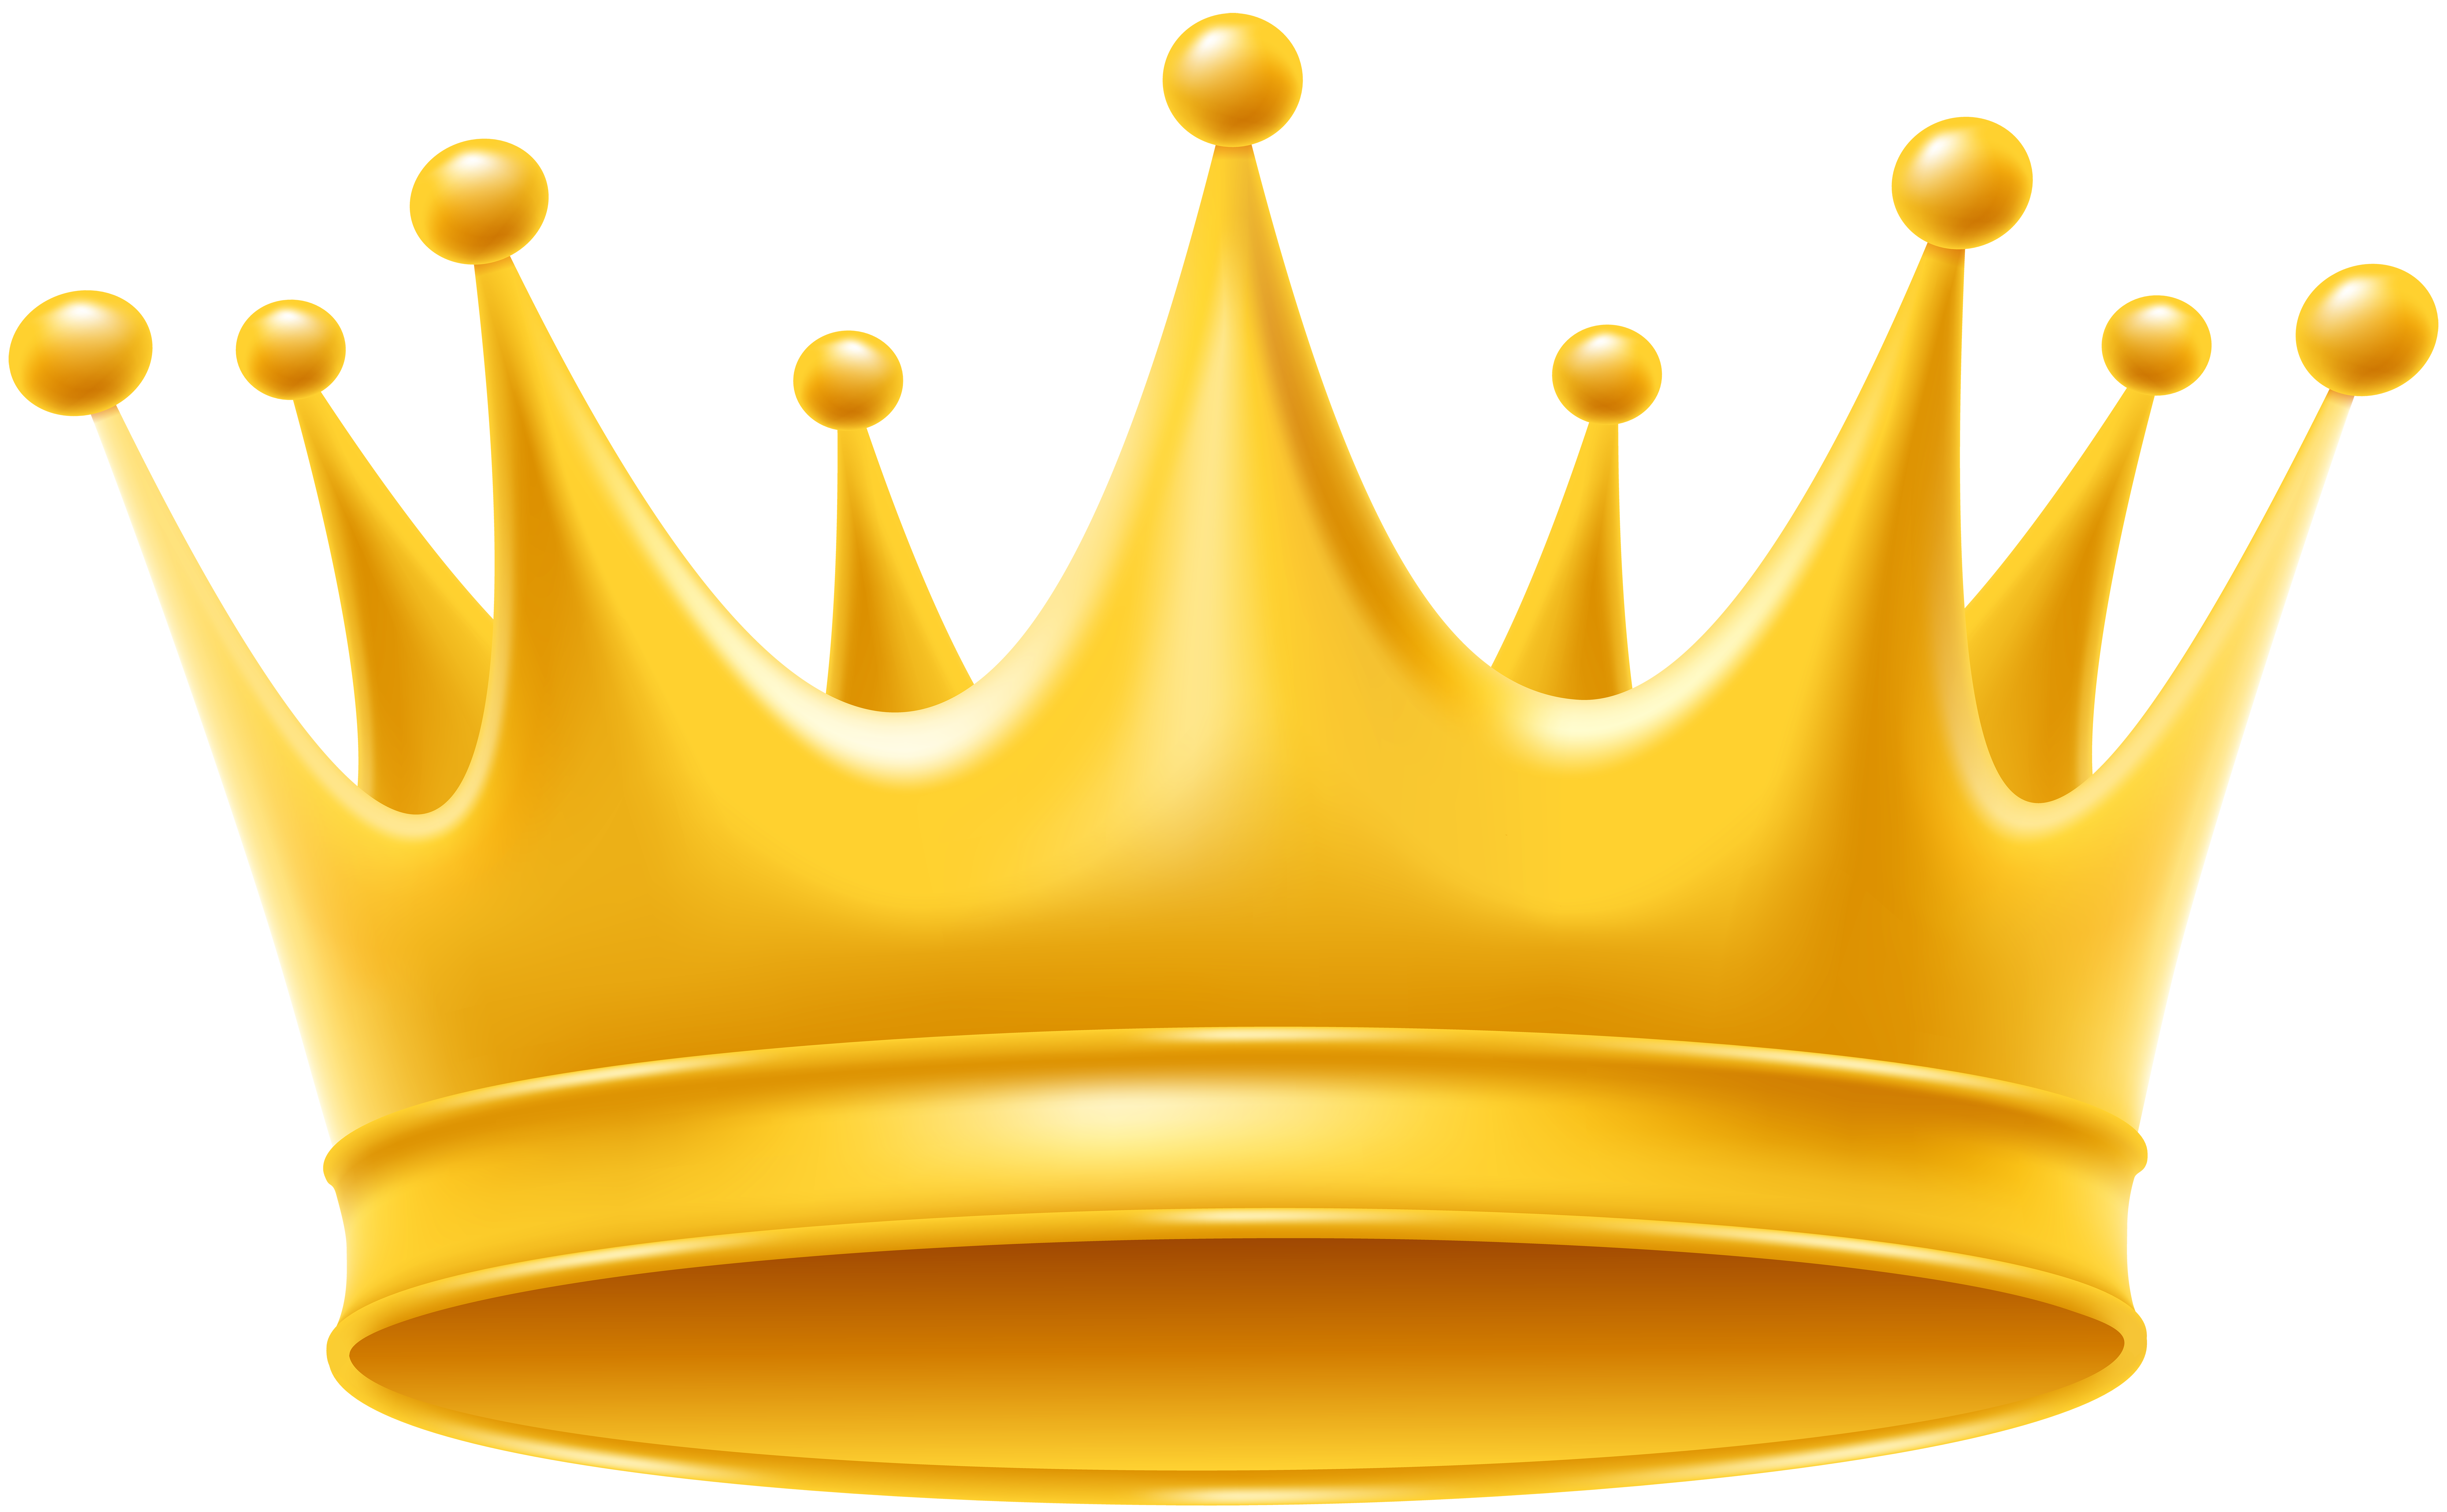 Download Crowns clipart cool crown, Crowns cool crown Transparent ...